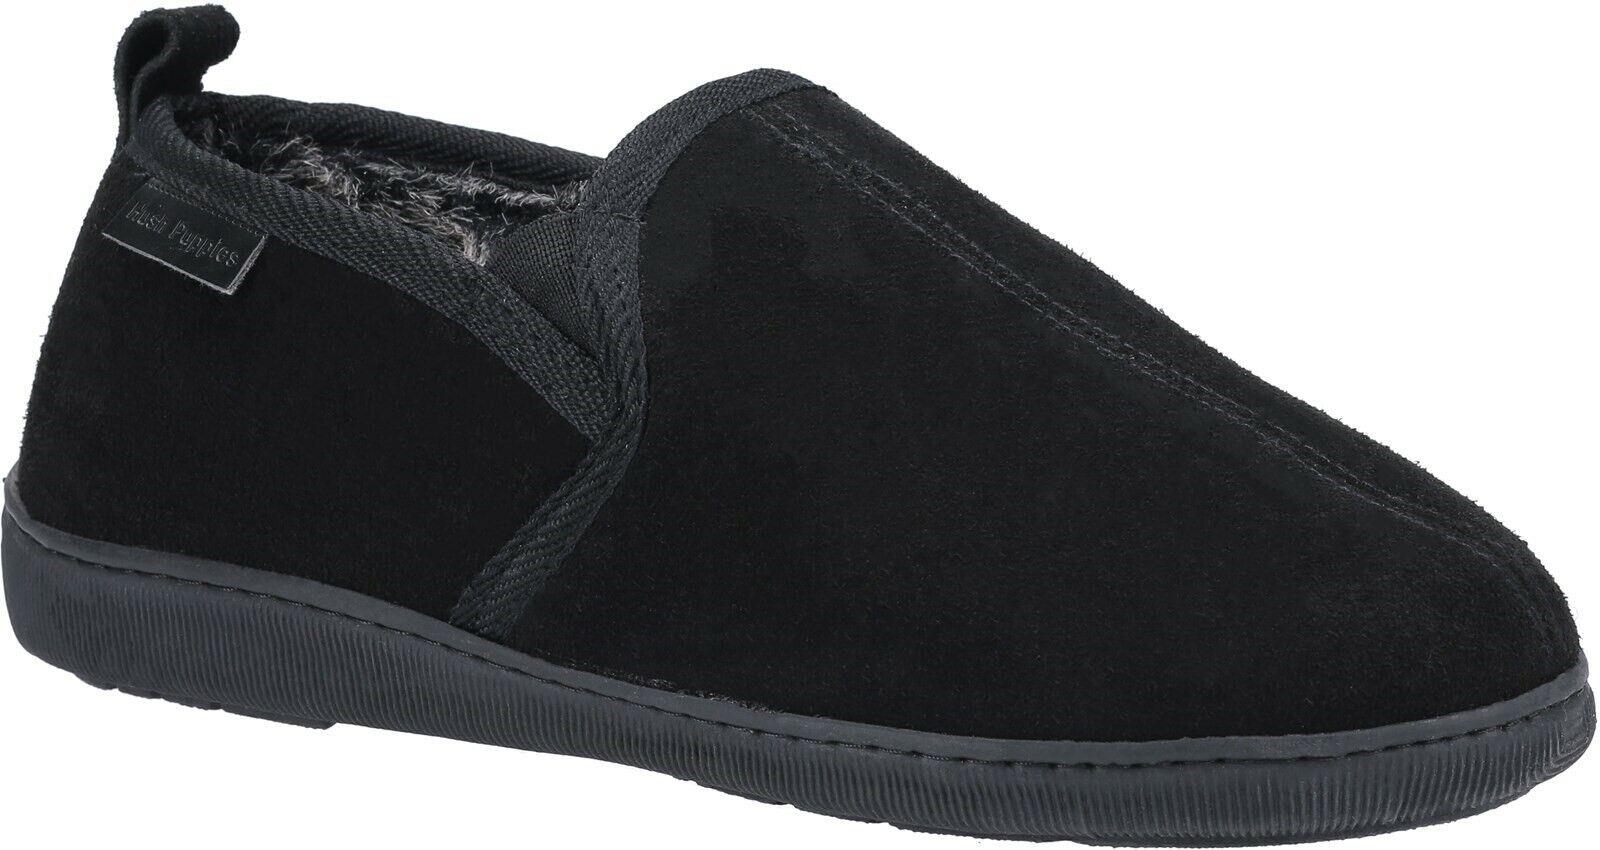 Hush Puppies Arnold black suede memory foam fur lined cosy slip on slippers